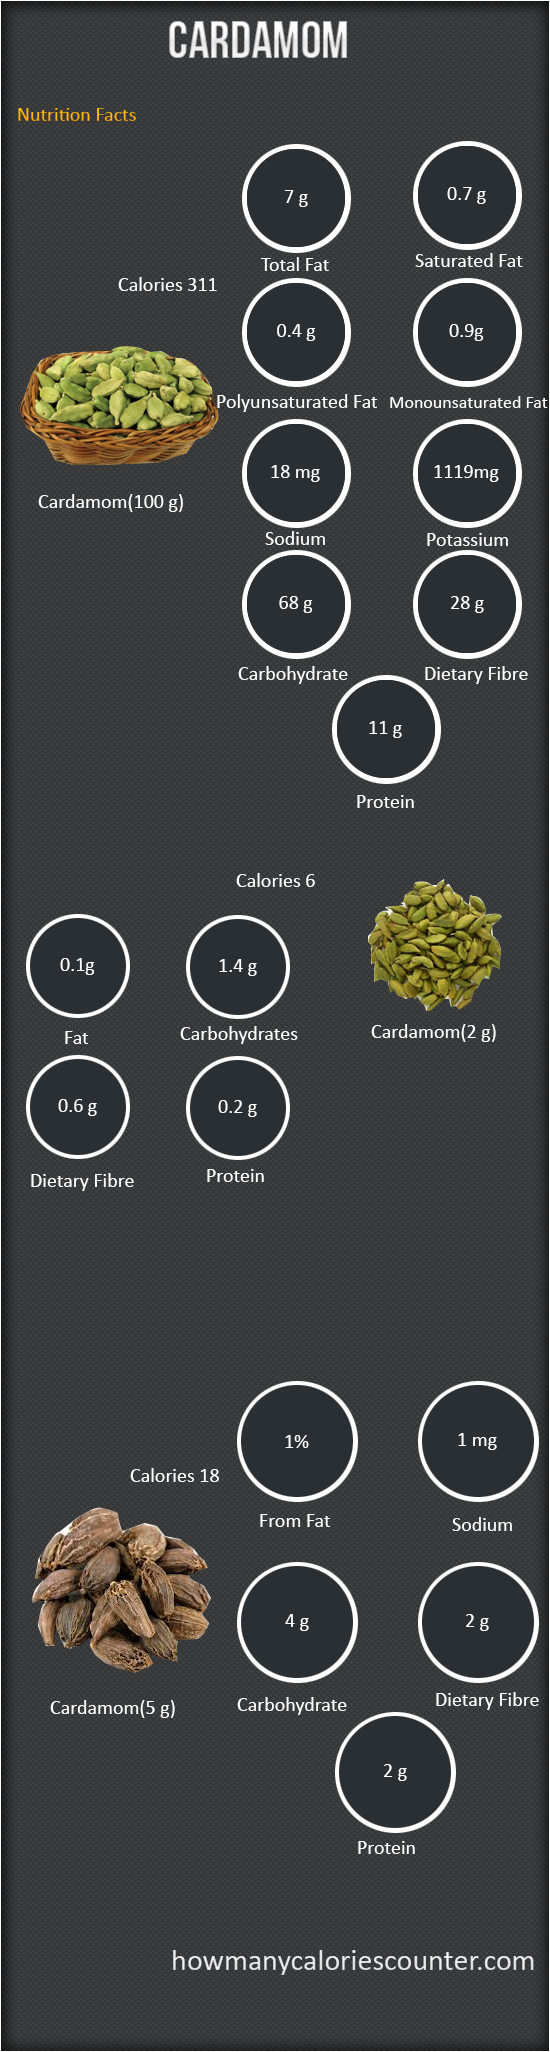 Calories in a Cardamom